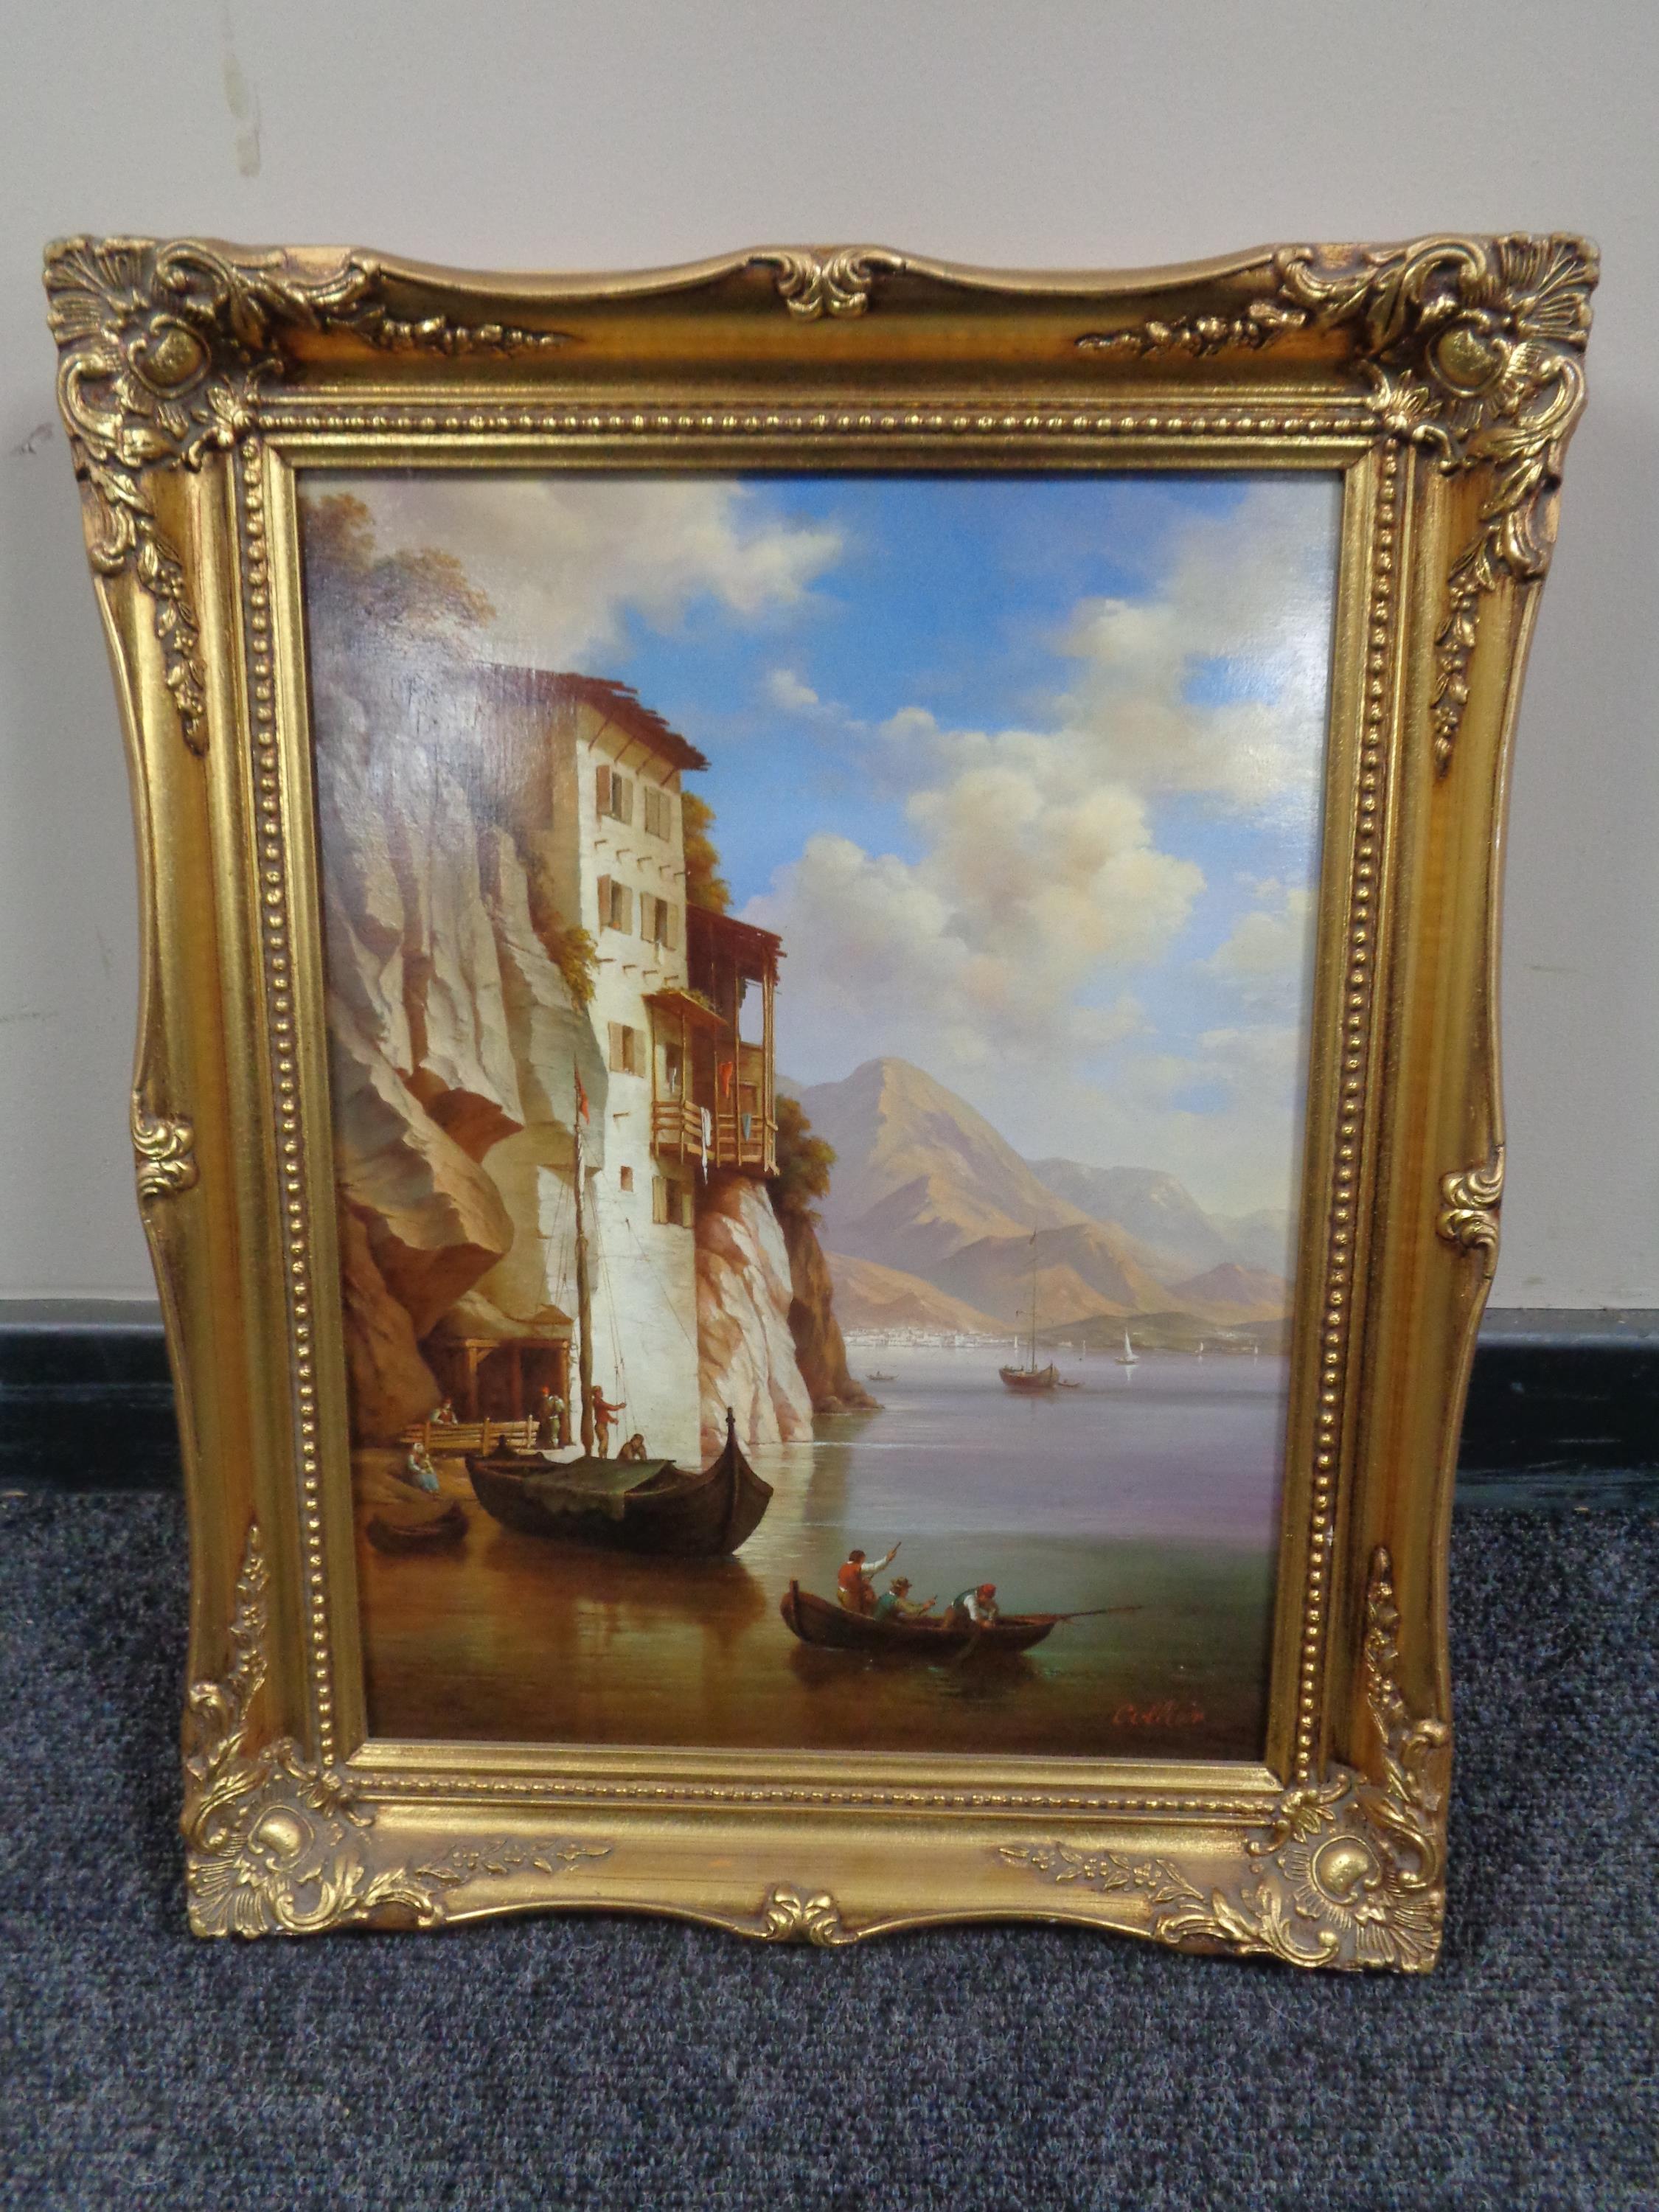 Collier (20th century) : Italian lake scene with figures in fishing boats,